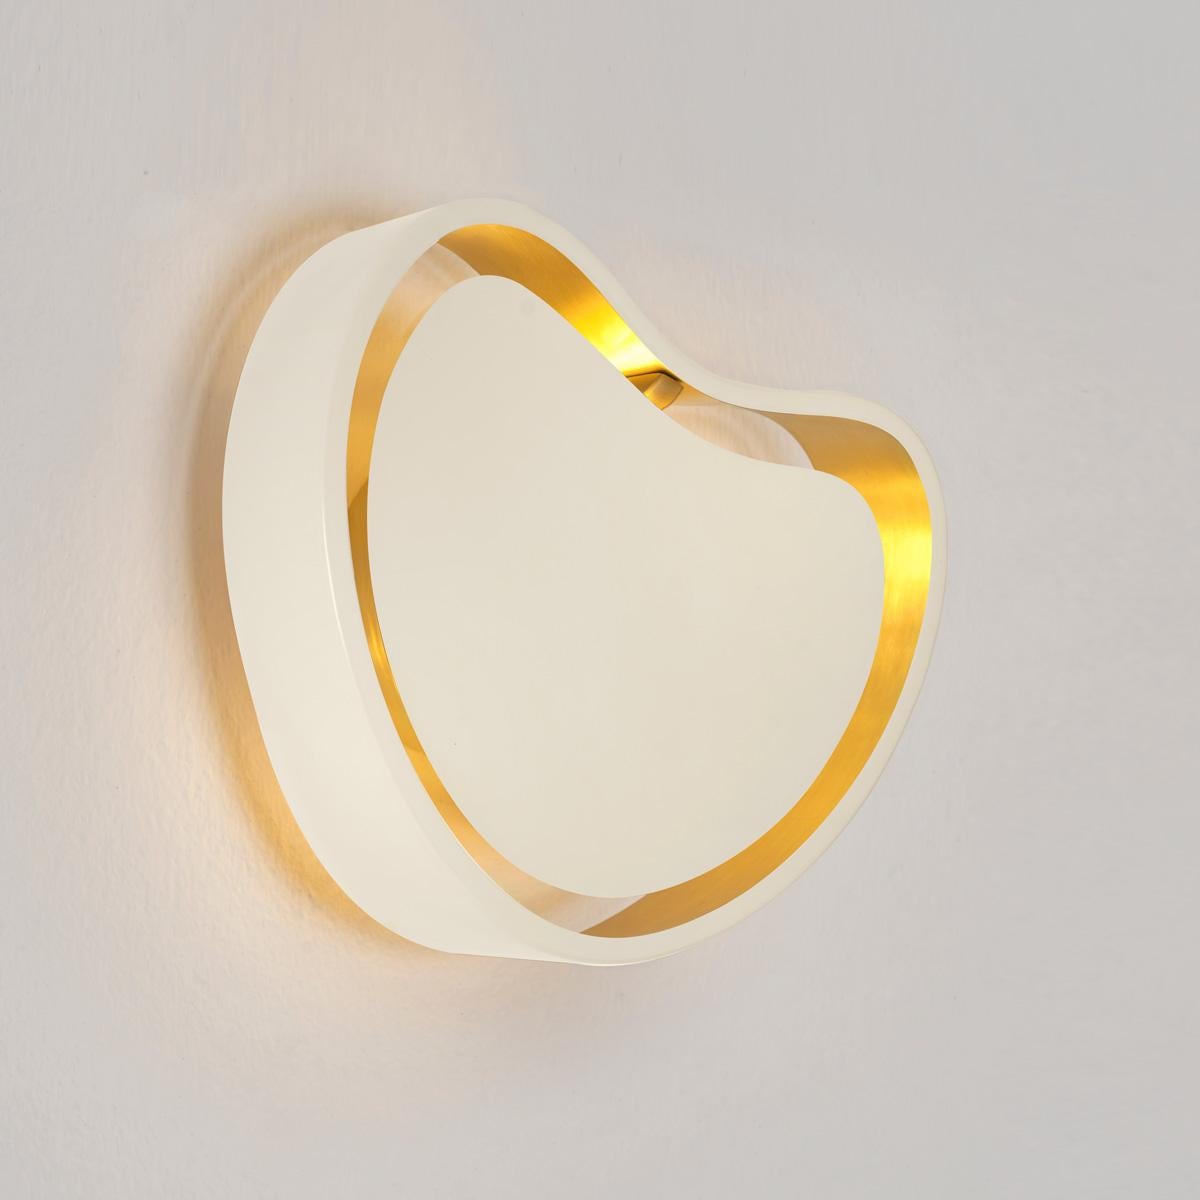 Italian Cuore Wall Light by Gaspare Asaro. Backlit Version. Bronze Finish For Sale